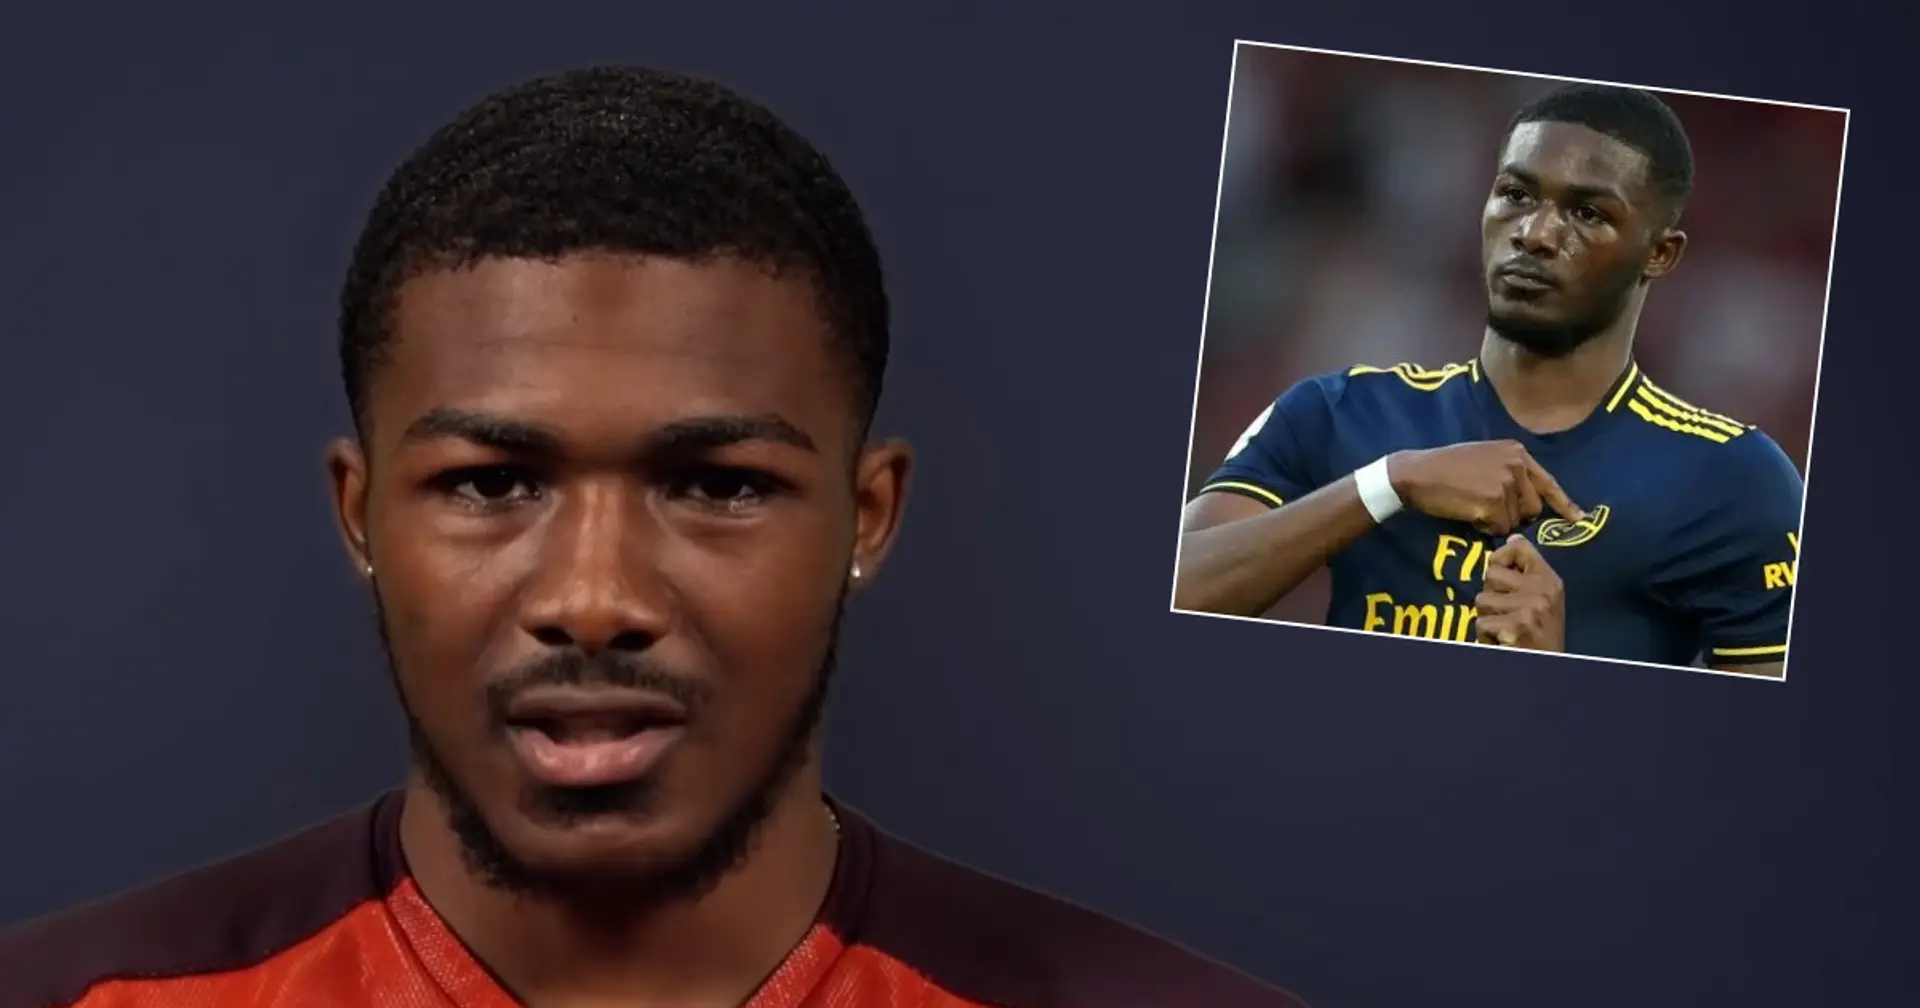 Maitland-Niles: 'It could be time to kiss Arsenal goodbye'